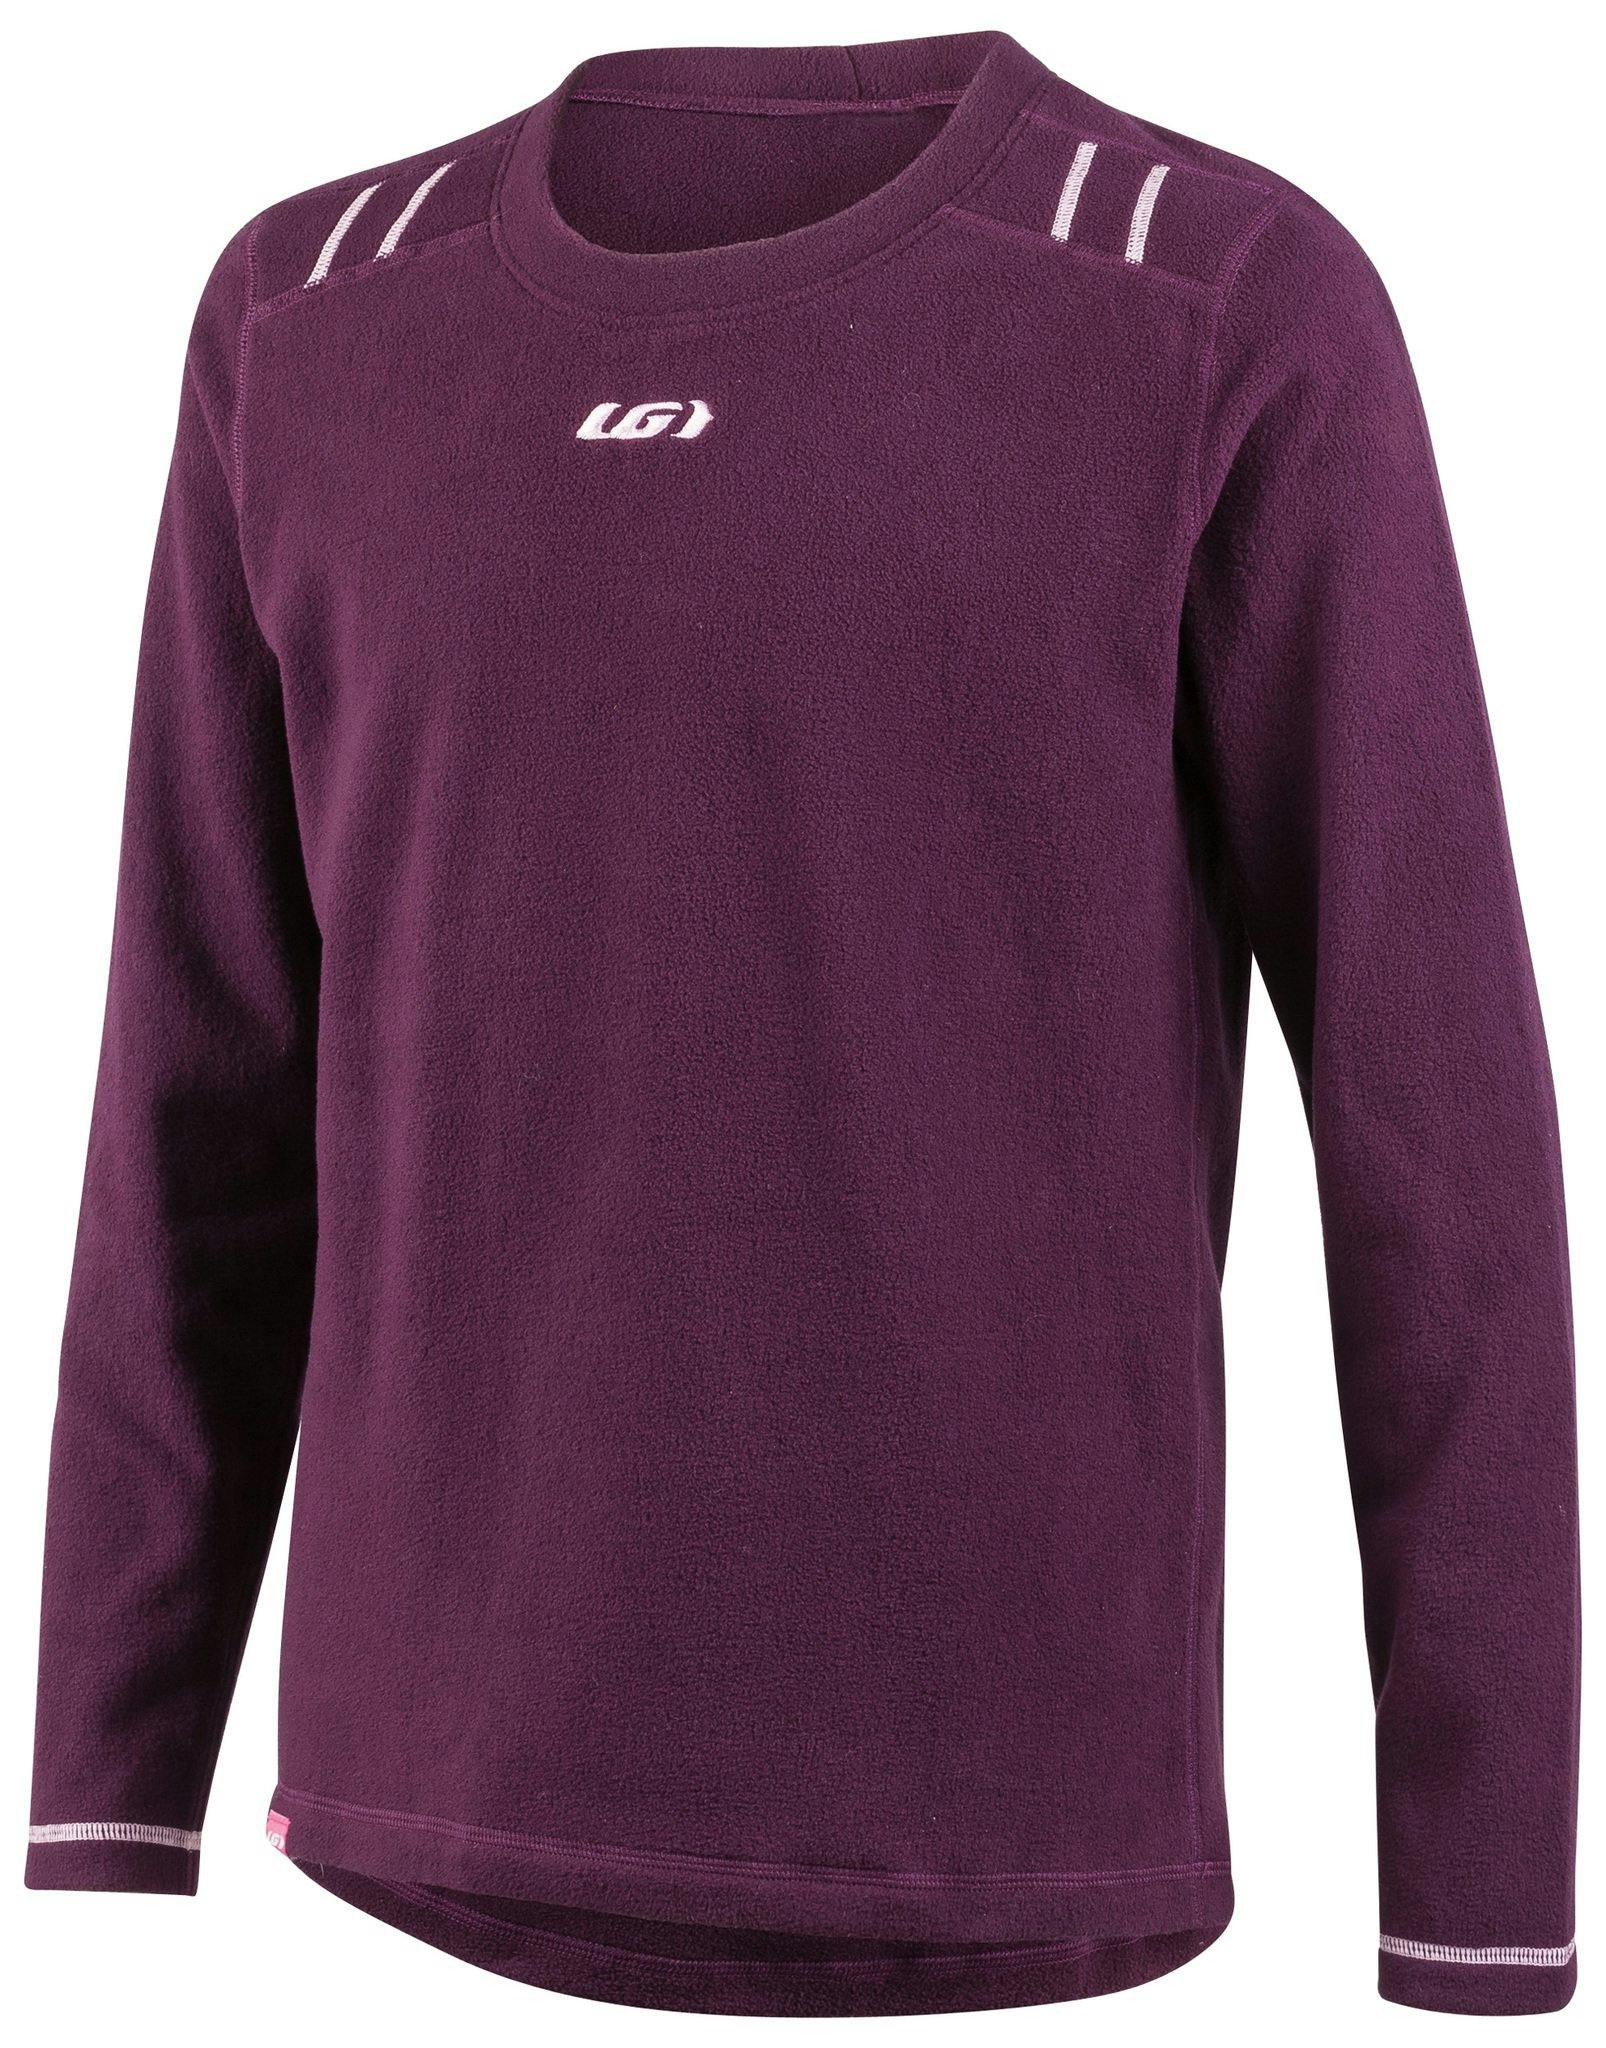 Product image for 4000 Crew Neck Baselayer Top - Kids